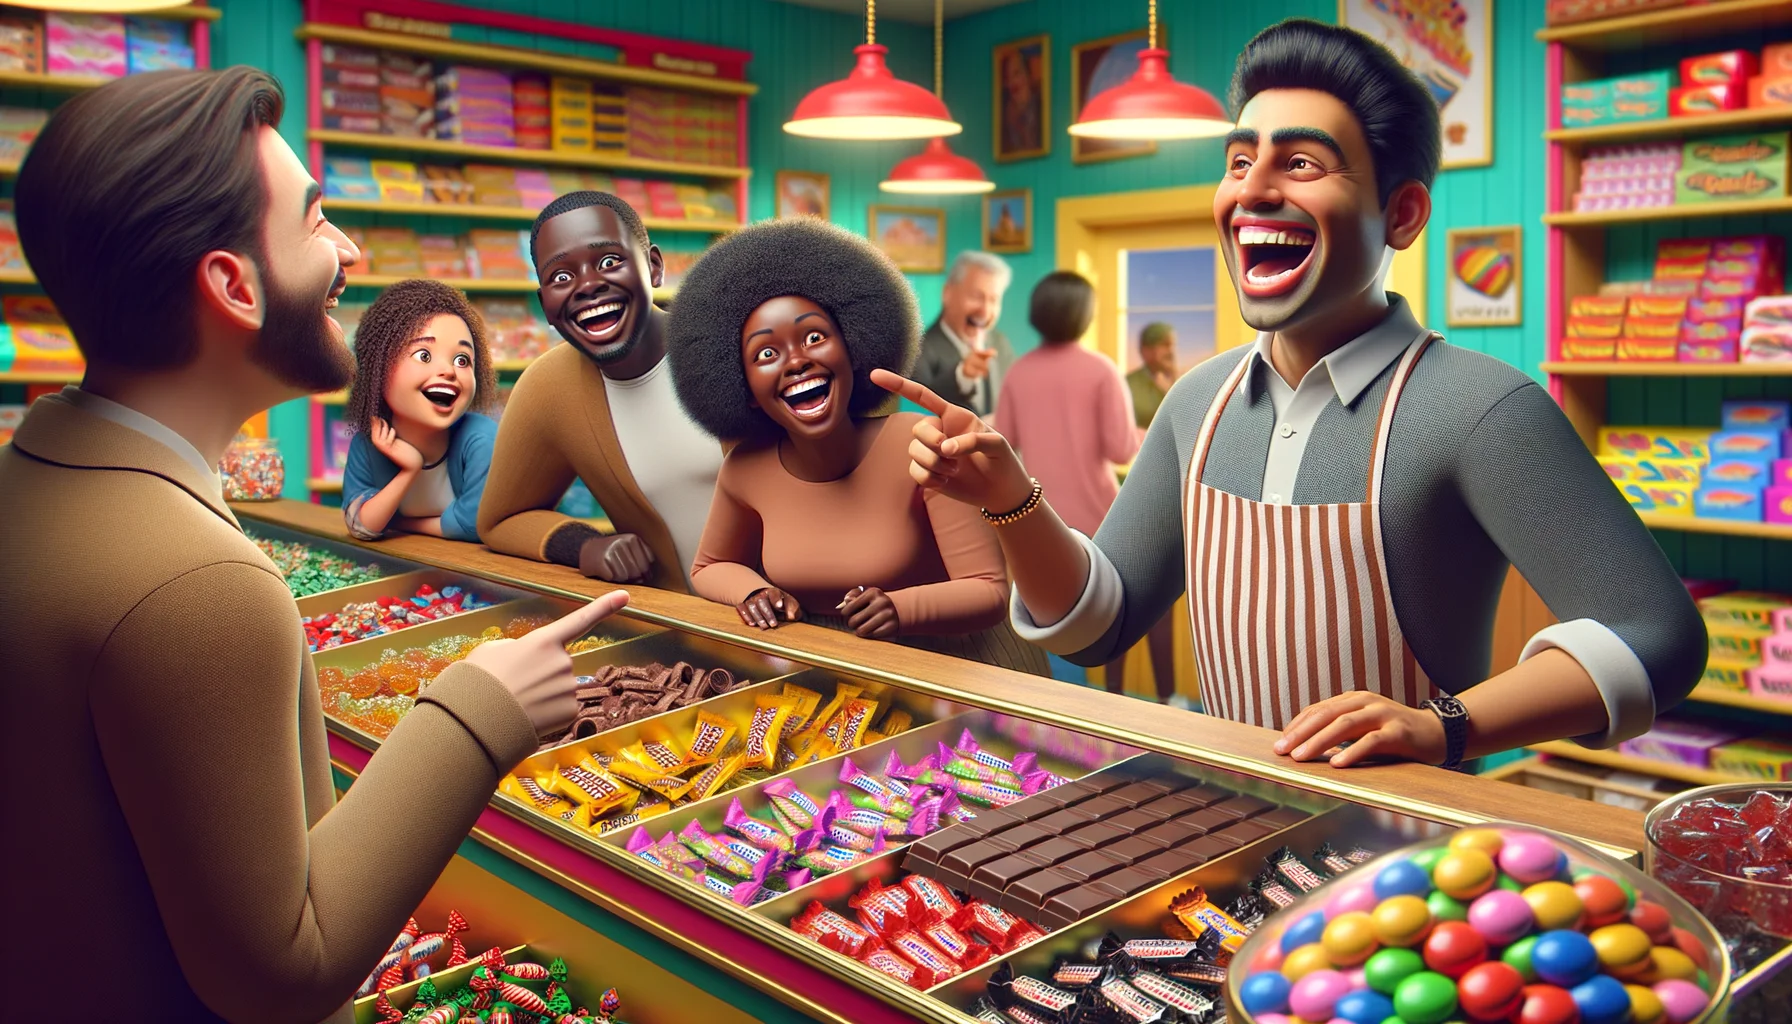 A hilarious and realistic scenario showcasing a variety of Low-FODMAP candy choices. In the scene, a South Asian male shopkeeper is laughing heartily behind a vibrant candy counter filled with all sorts of Low-FODMAP candies: chocolate without high fructose corn syrup, hard candies made from pure cane sugar, and gummy candies free from artificial sweeteners. Visitants include a Caucasian woman visually surprised by the variety, a Black kid pointing excitedly at a gummy candy, and a Middle-Eastern man deciding between chocolate bars. The candy store's interior should be colorful, inviting, and filled with laughter.